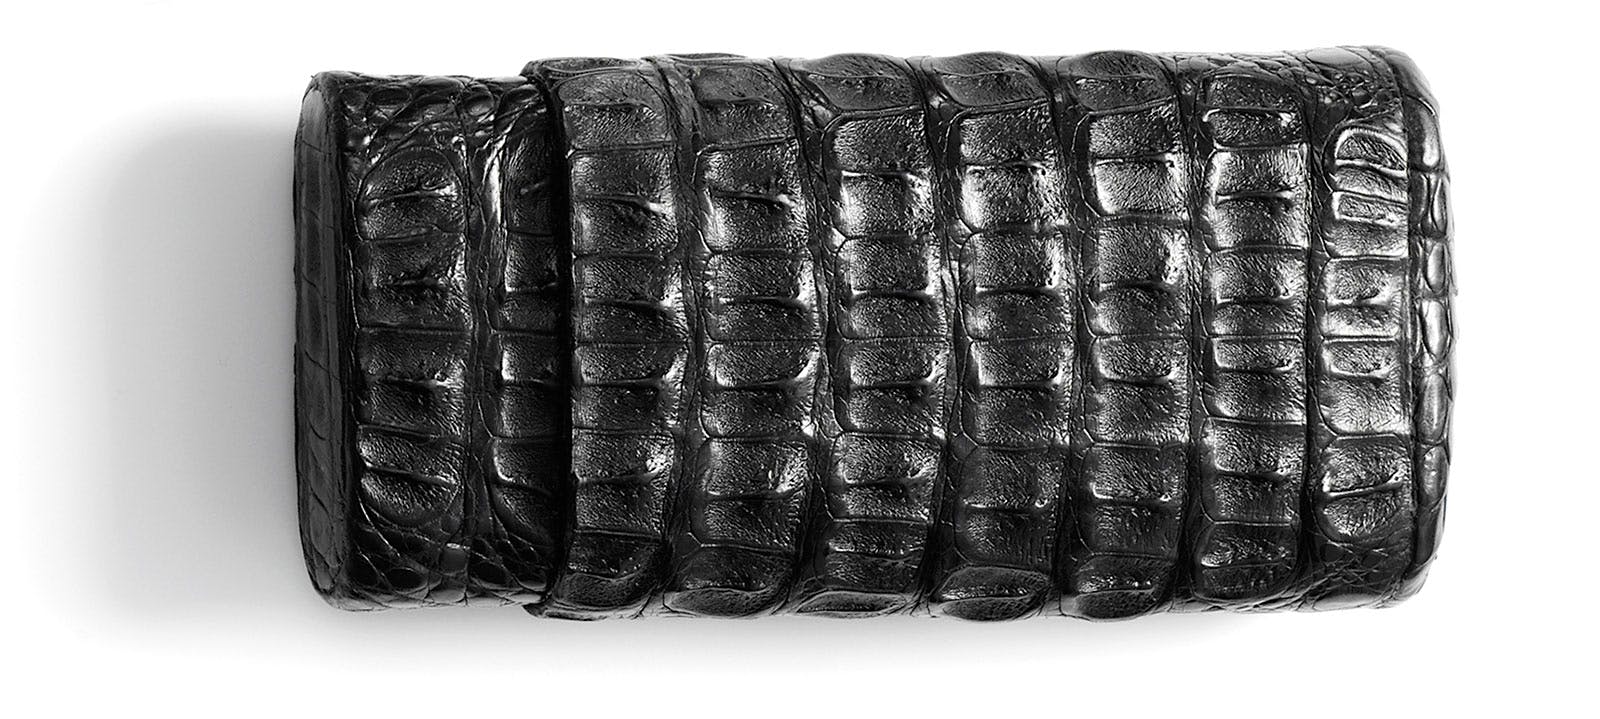 Brizard and Co.’s Black Caiman Crocodile 3 Cigar Case has a fully lined, Spanish cedar interior that helps cigars maintain proper humidity while traveling.